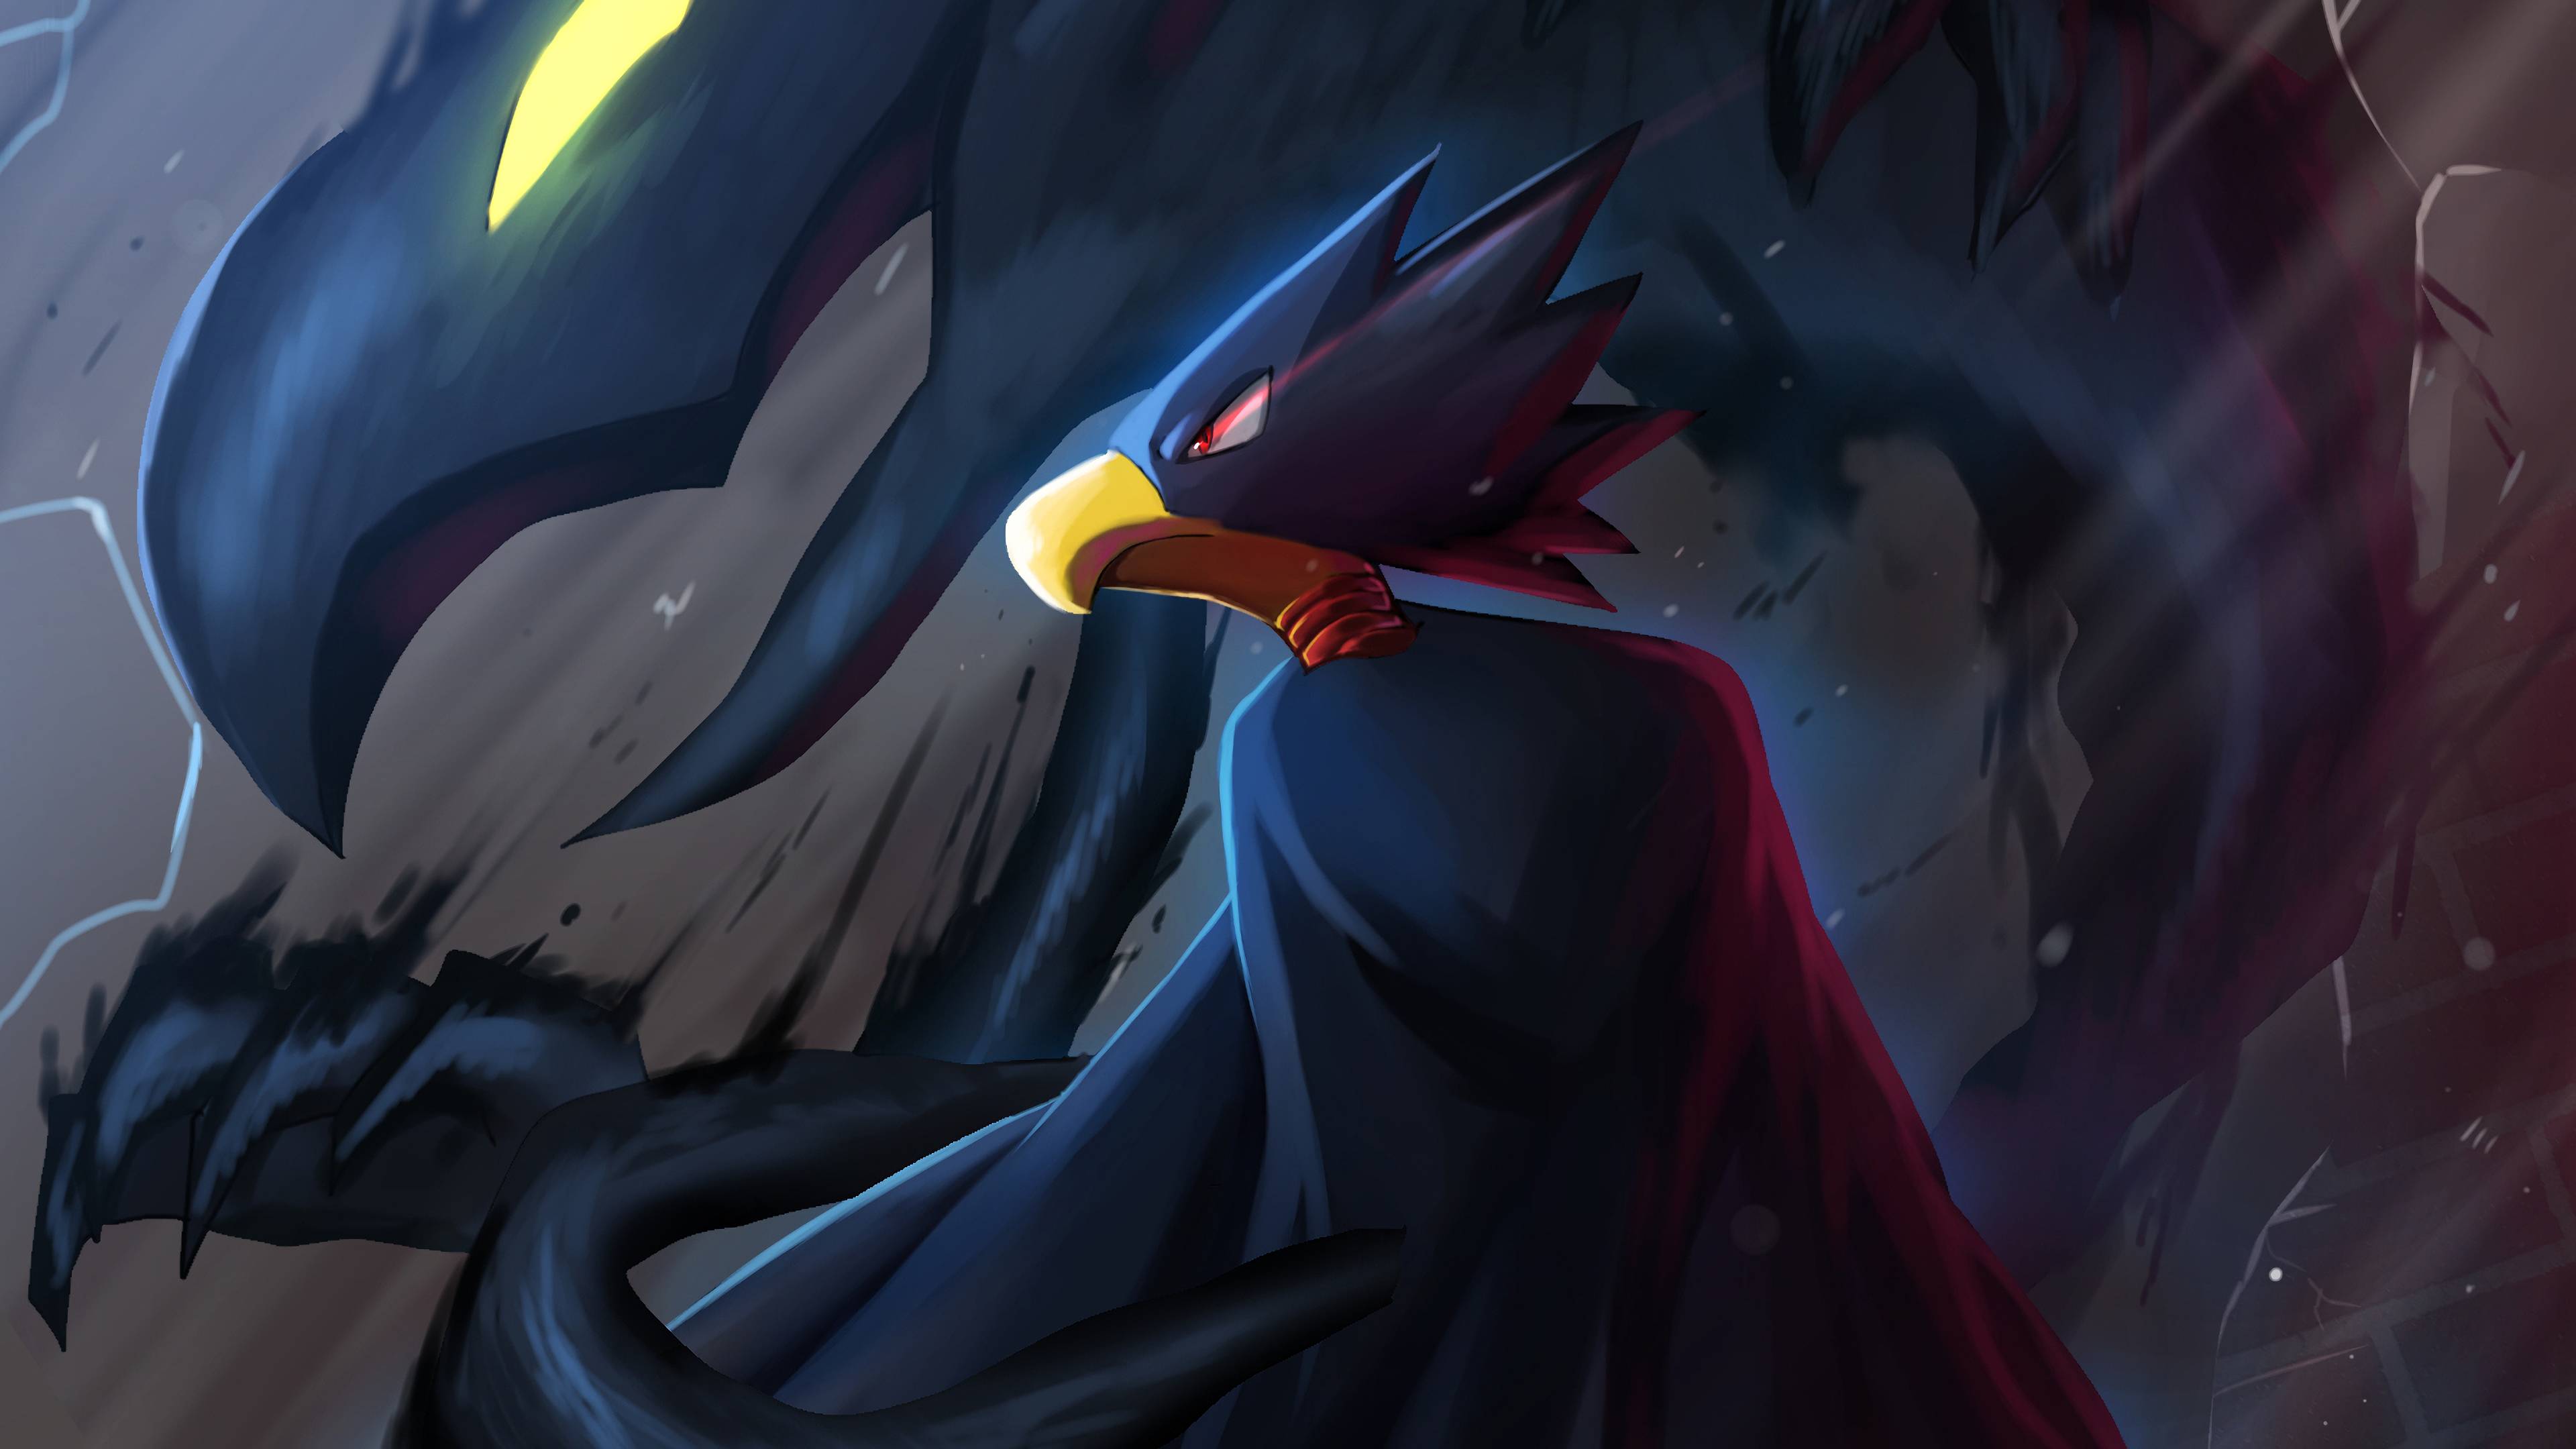 80 Fumikage Tokoyami HD Wallpapers and Backgrounds